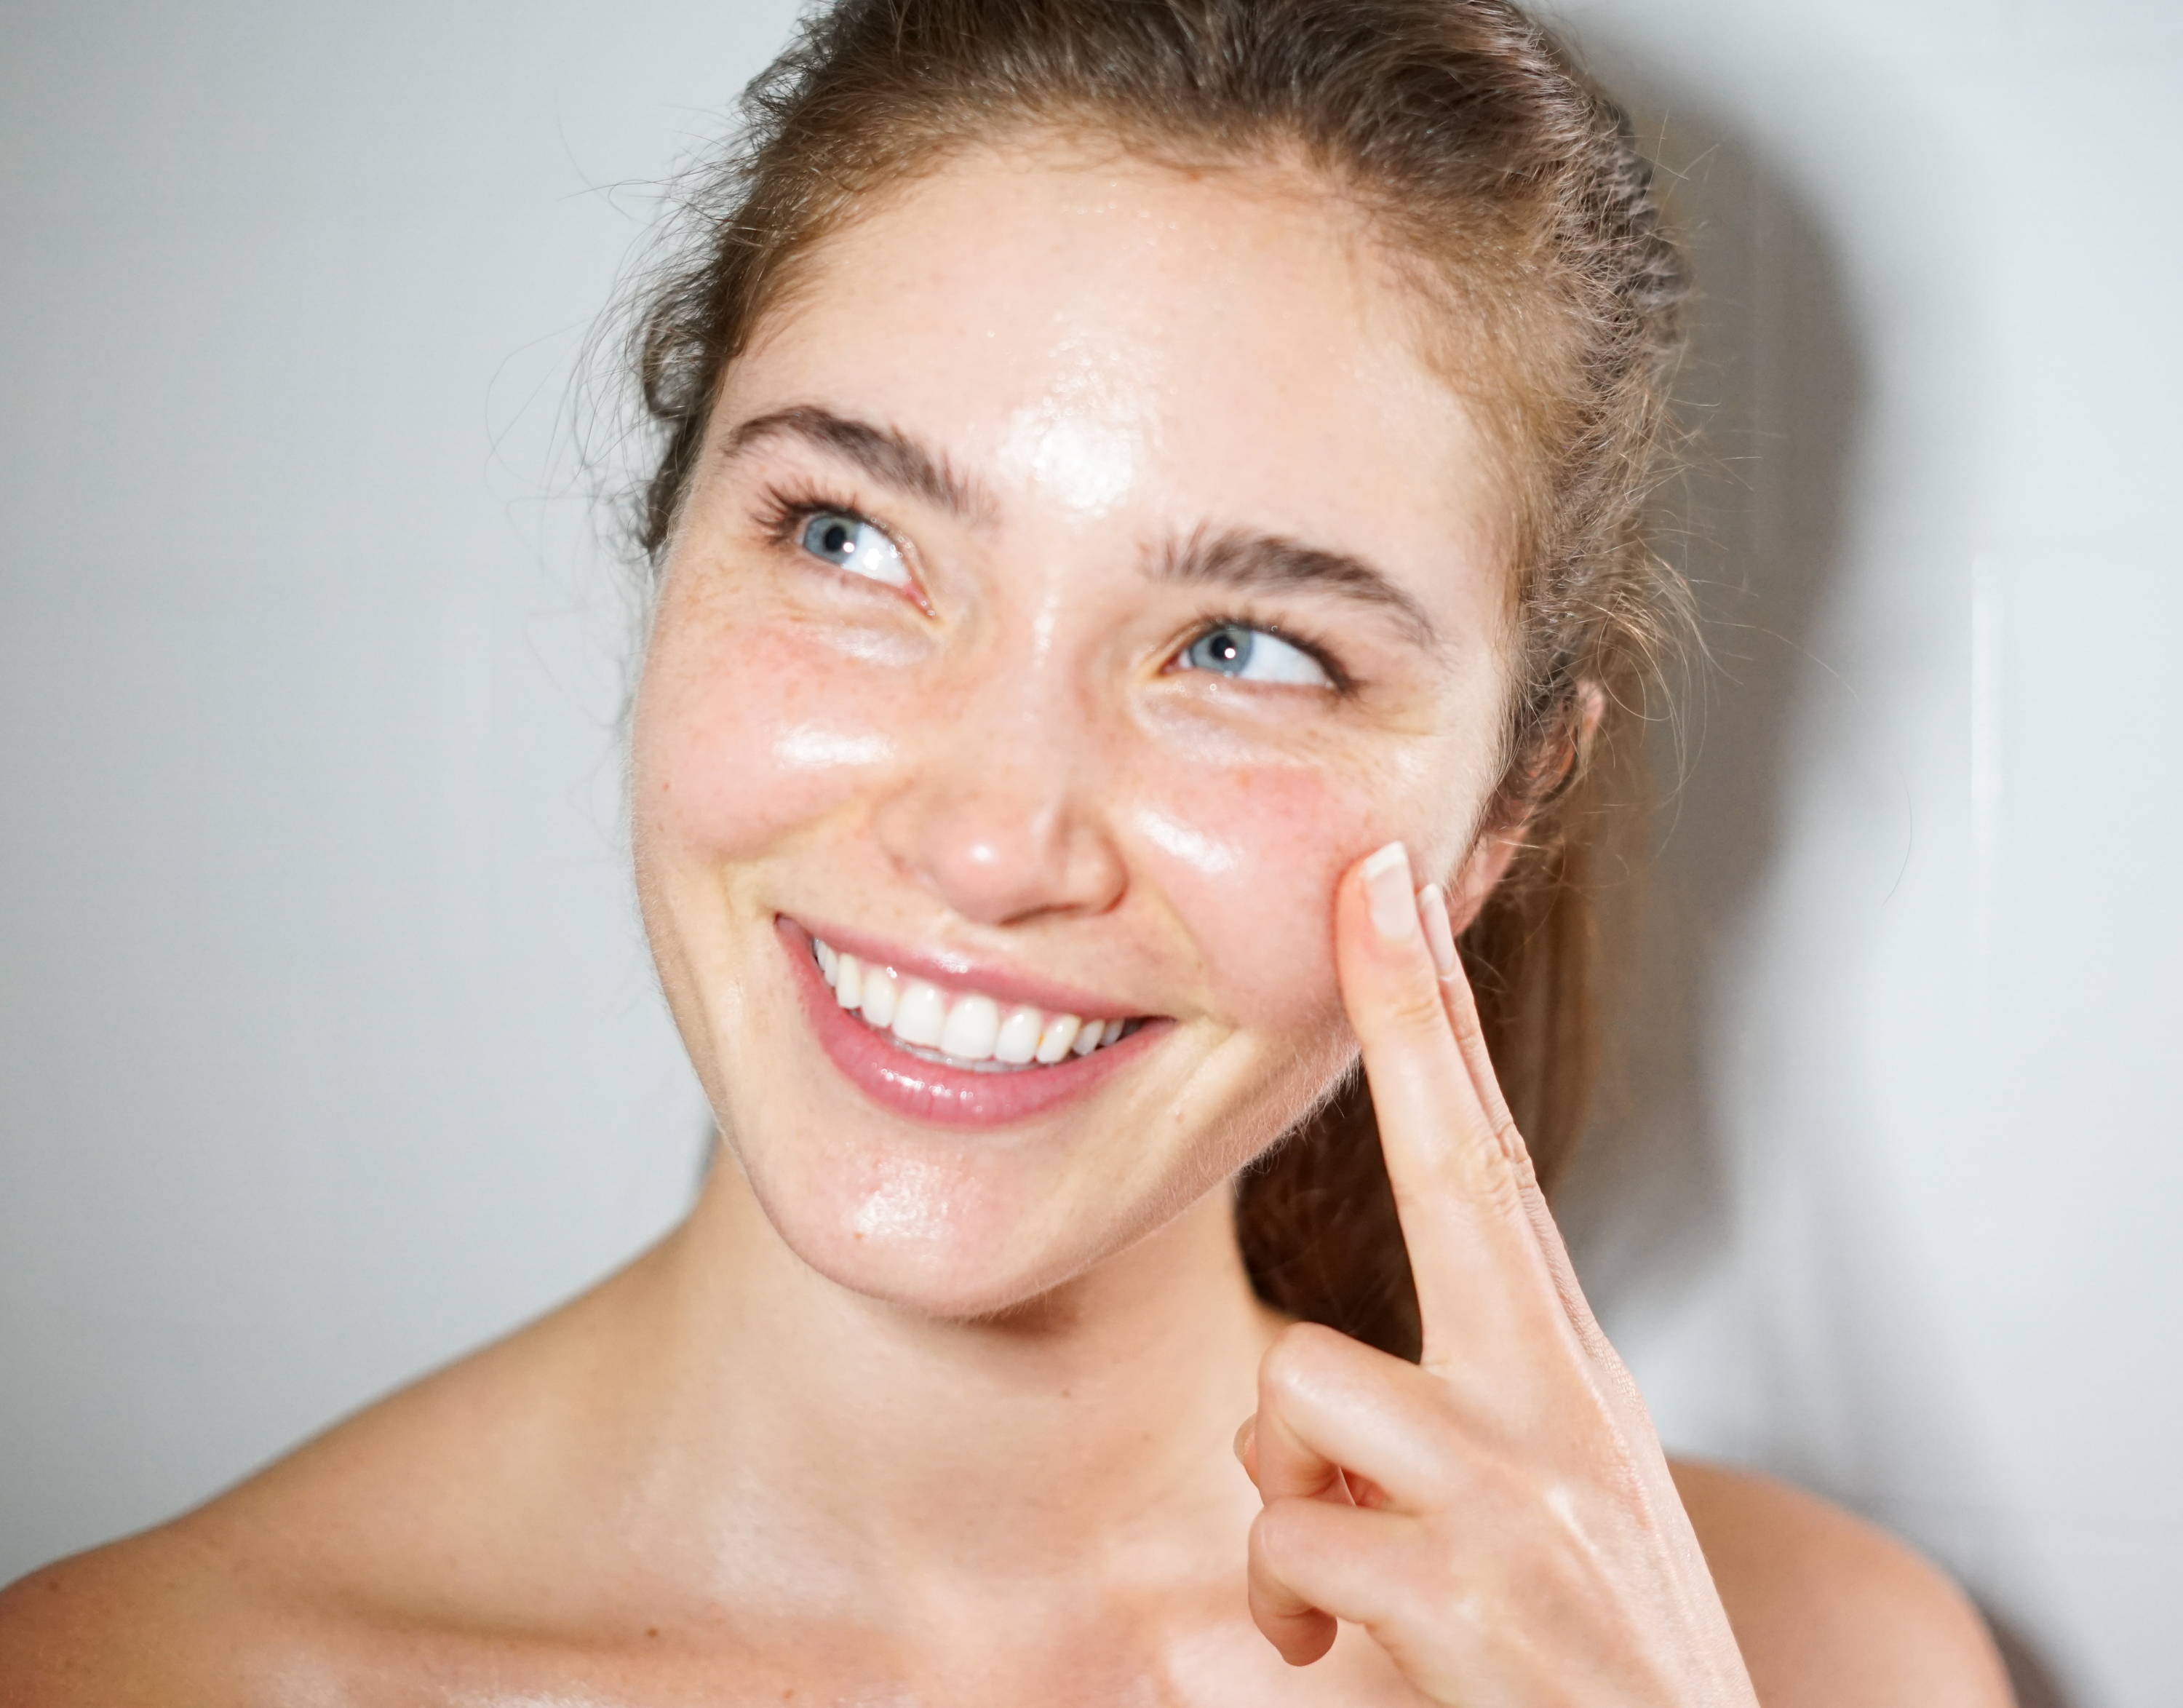 A woman smiling while feeling her cheek with her fingers